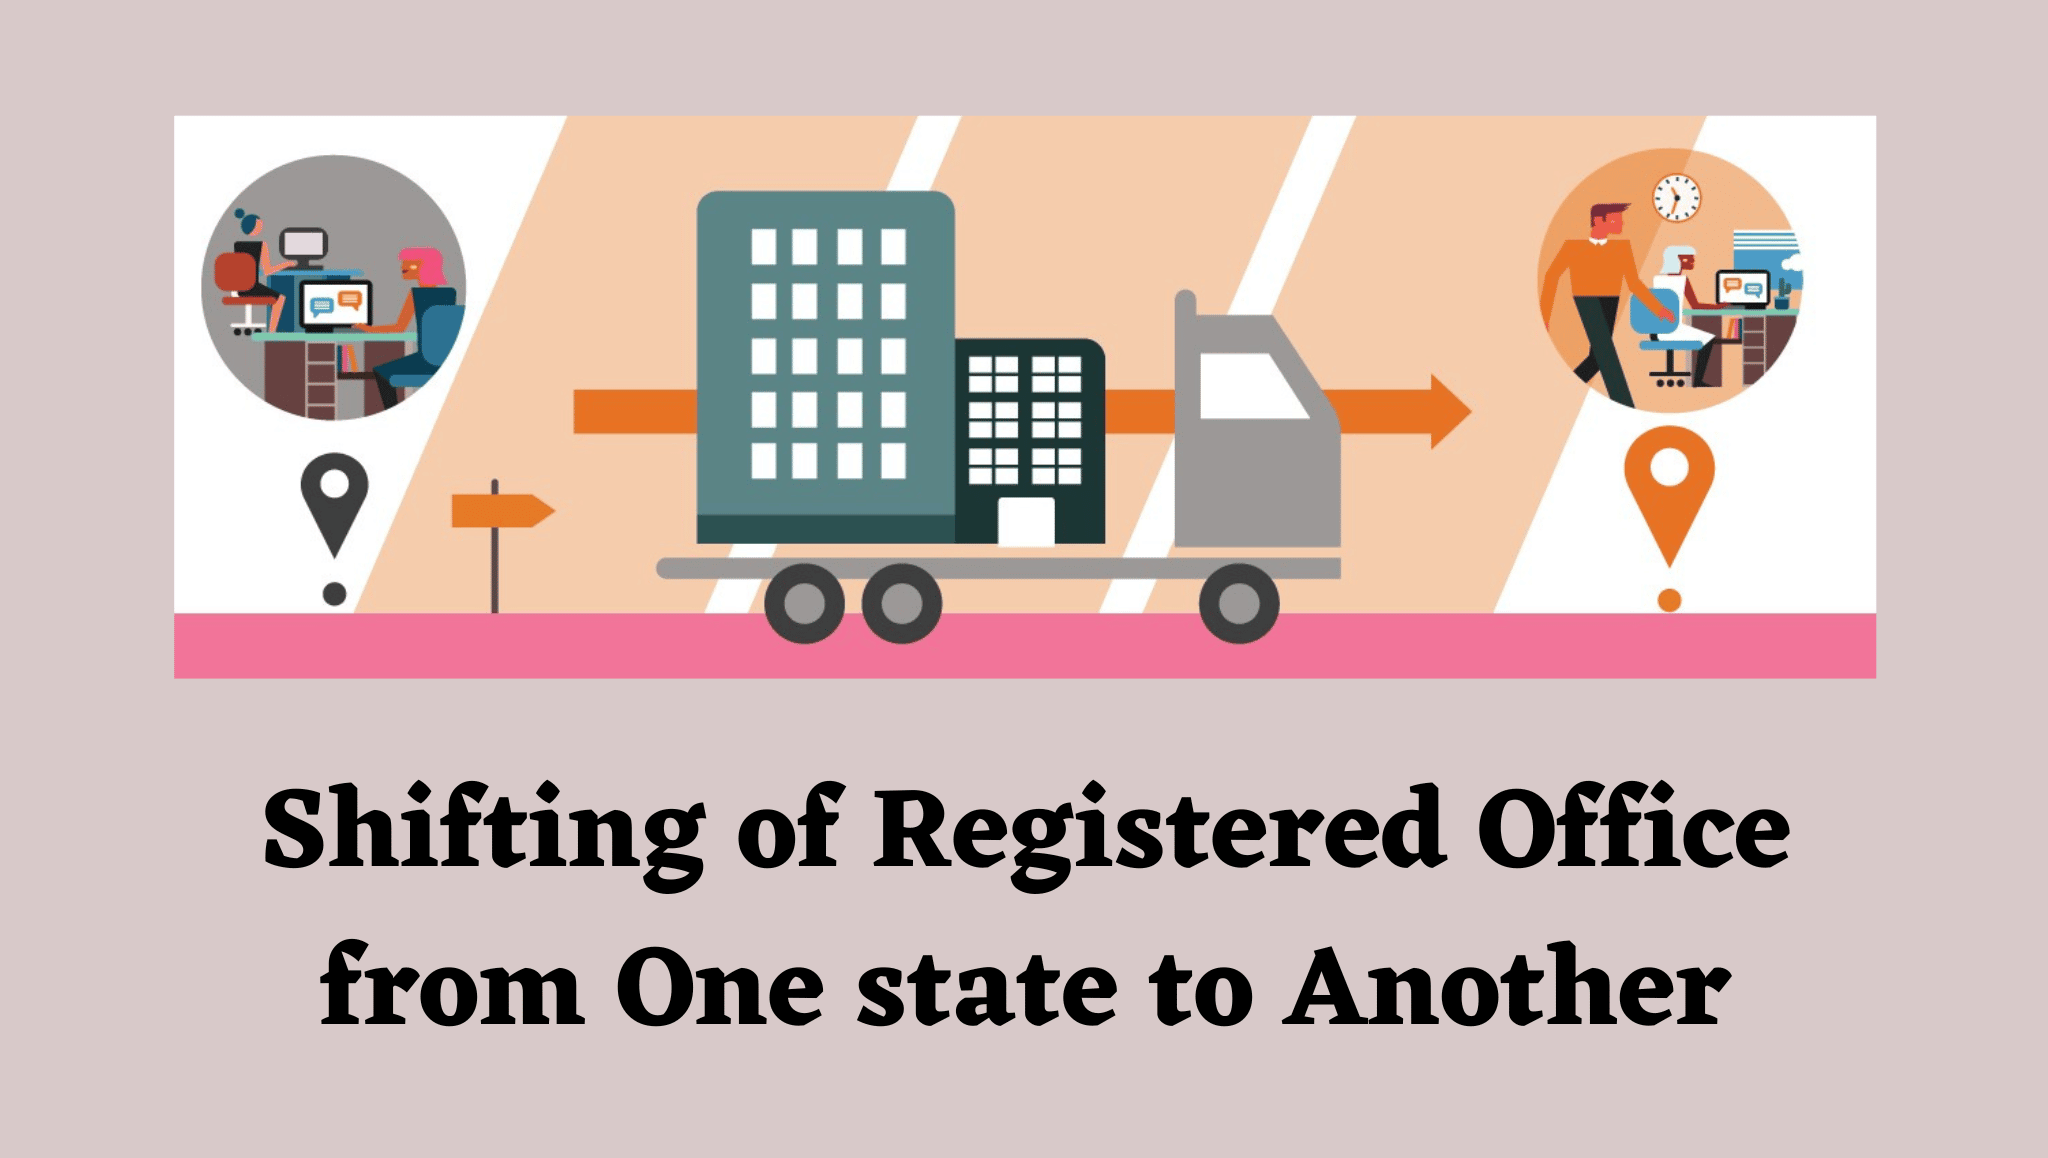 Shifting of registered office from one state to another